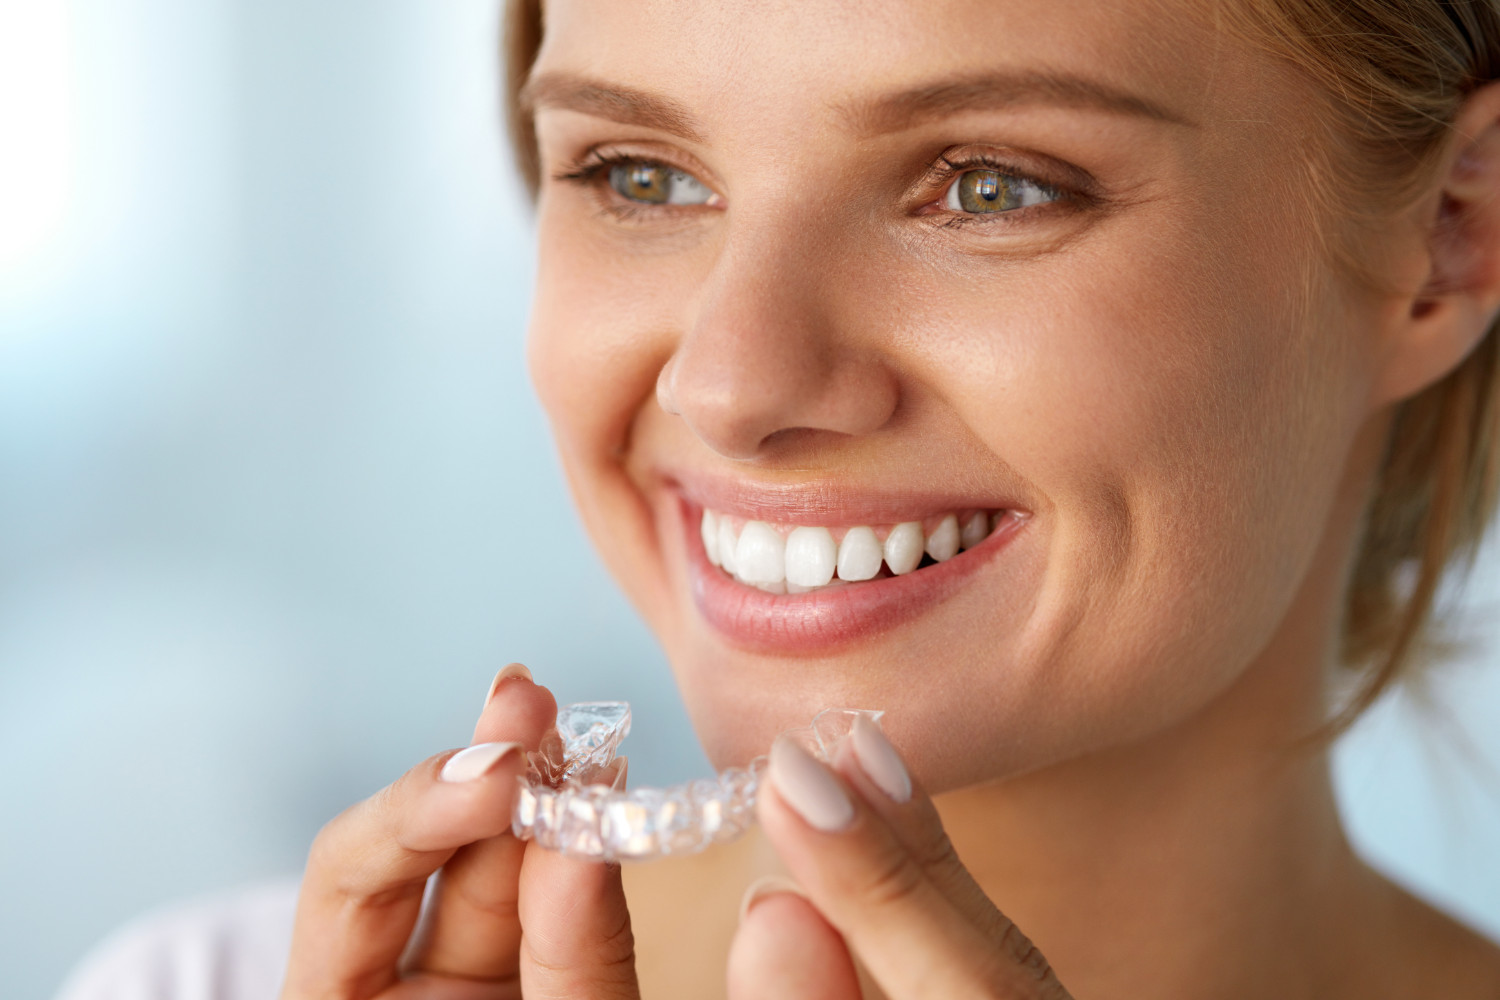 How To Get The Most Out Of Invisalign Treatment